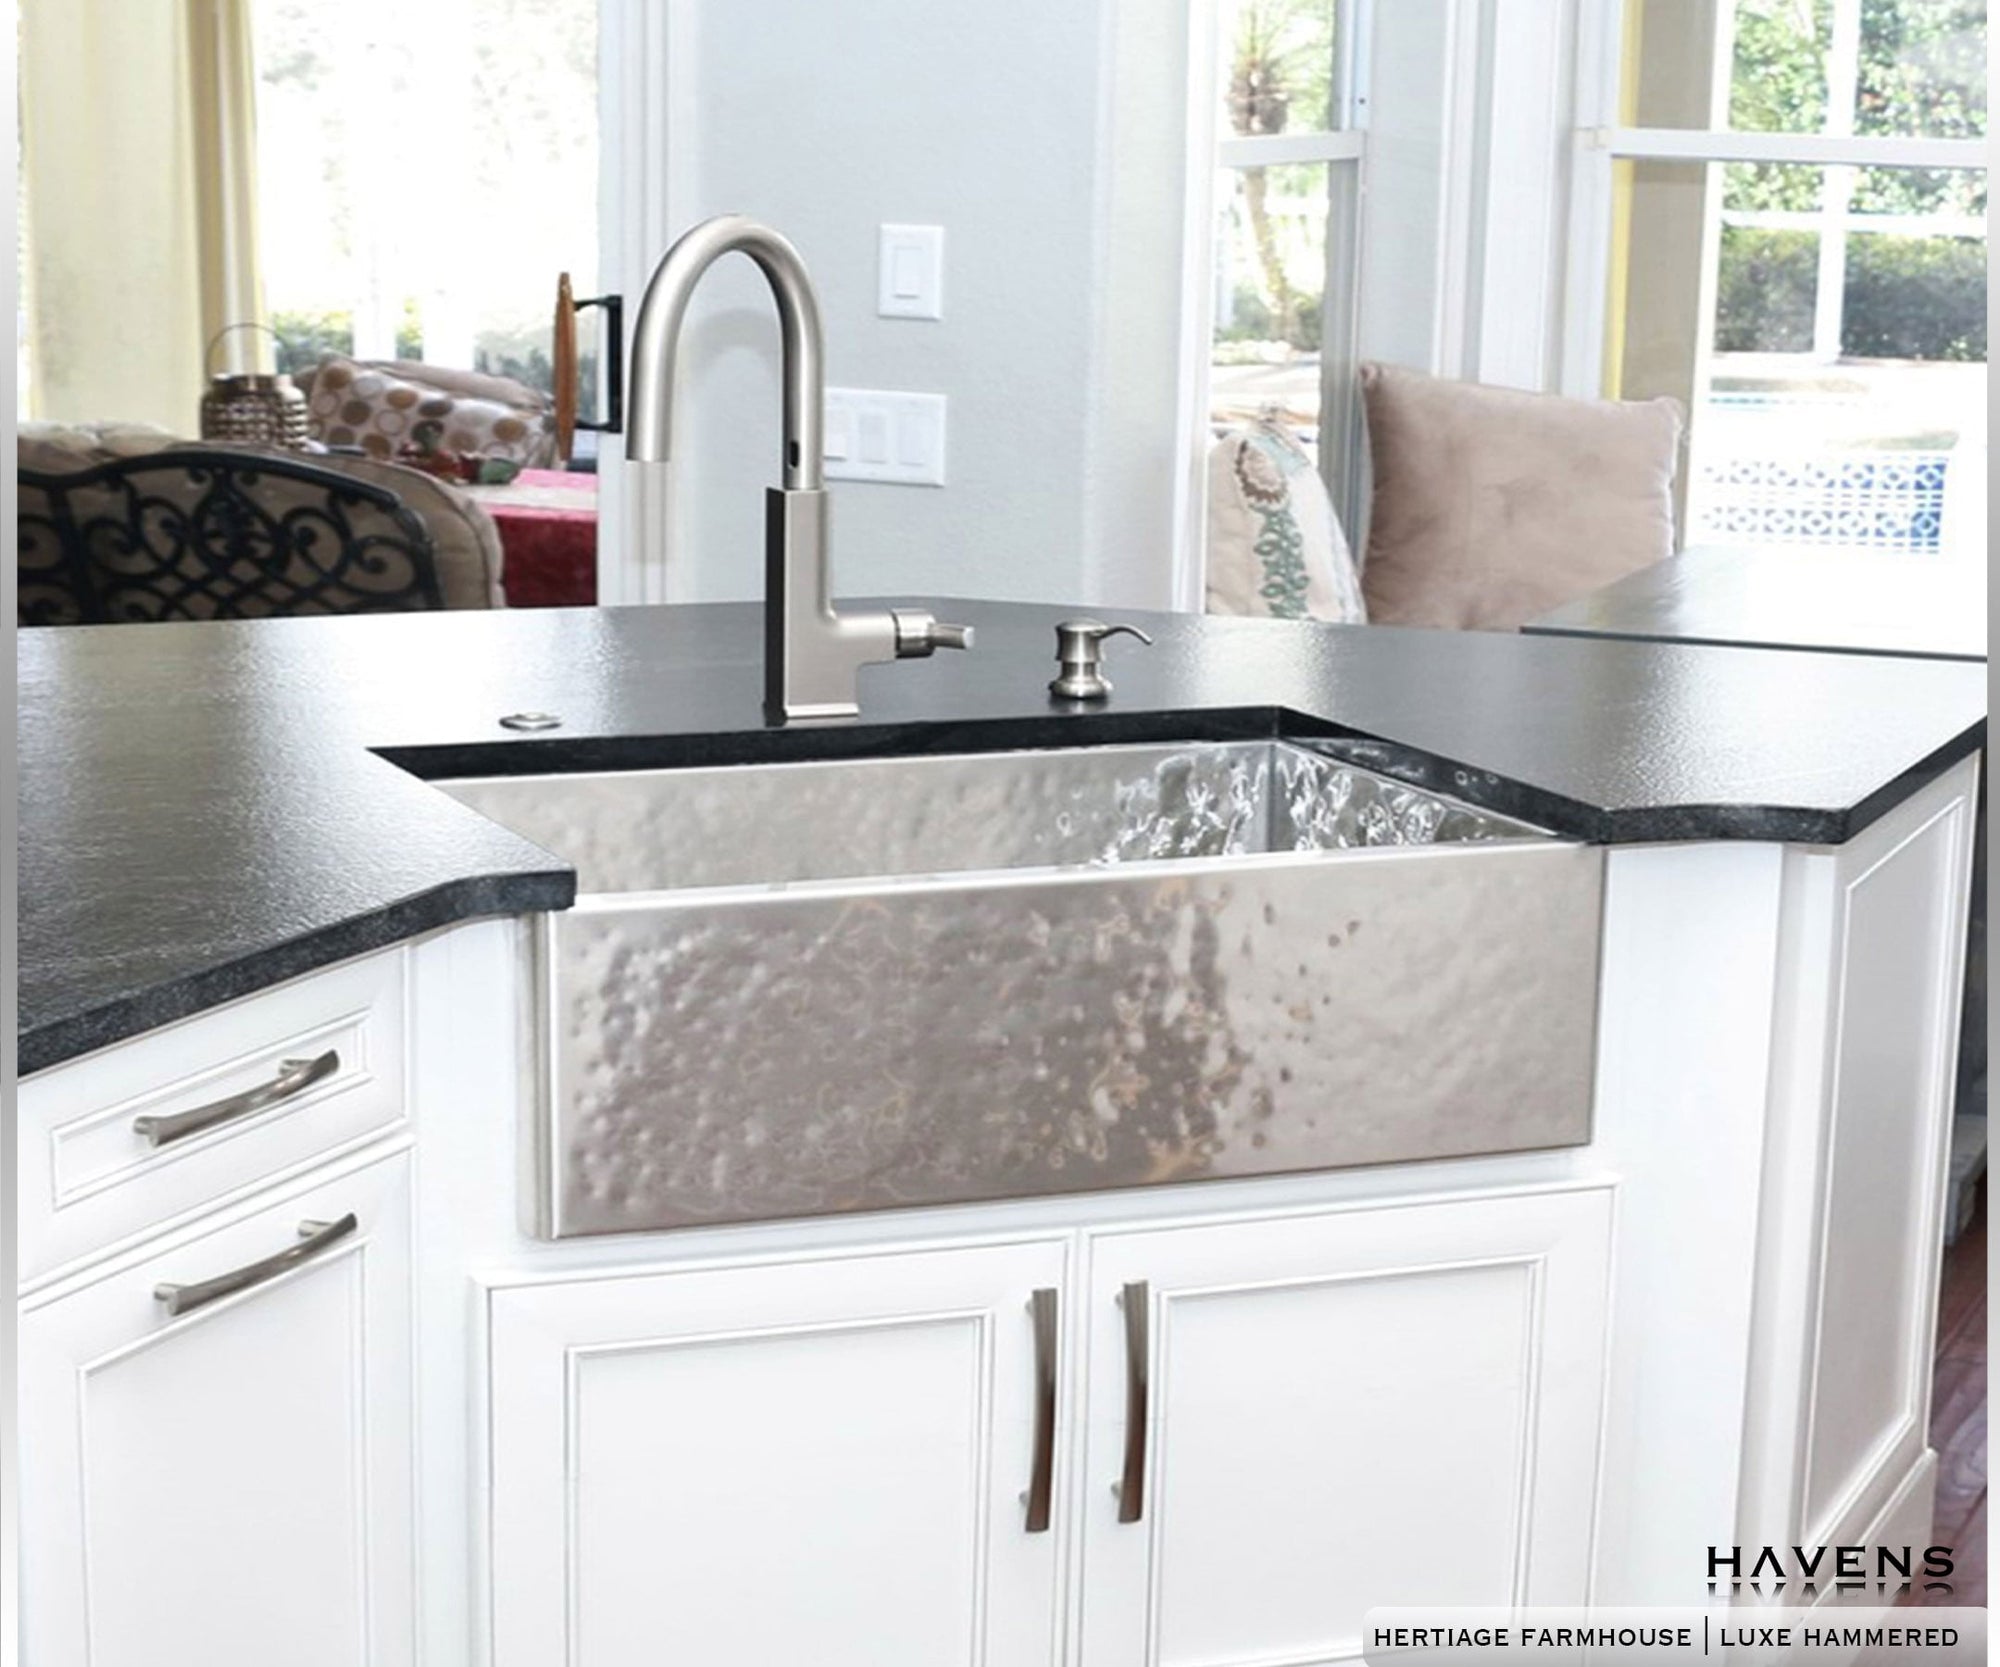 Heritage Farmhouse Sink - Luxe  Hammered Stainless